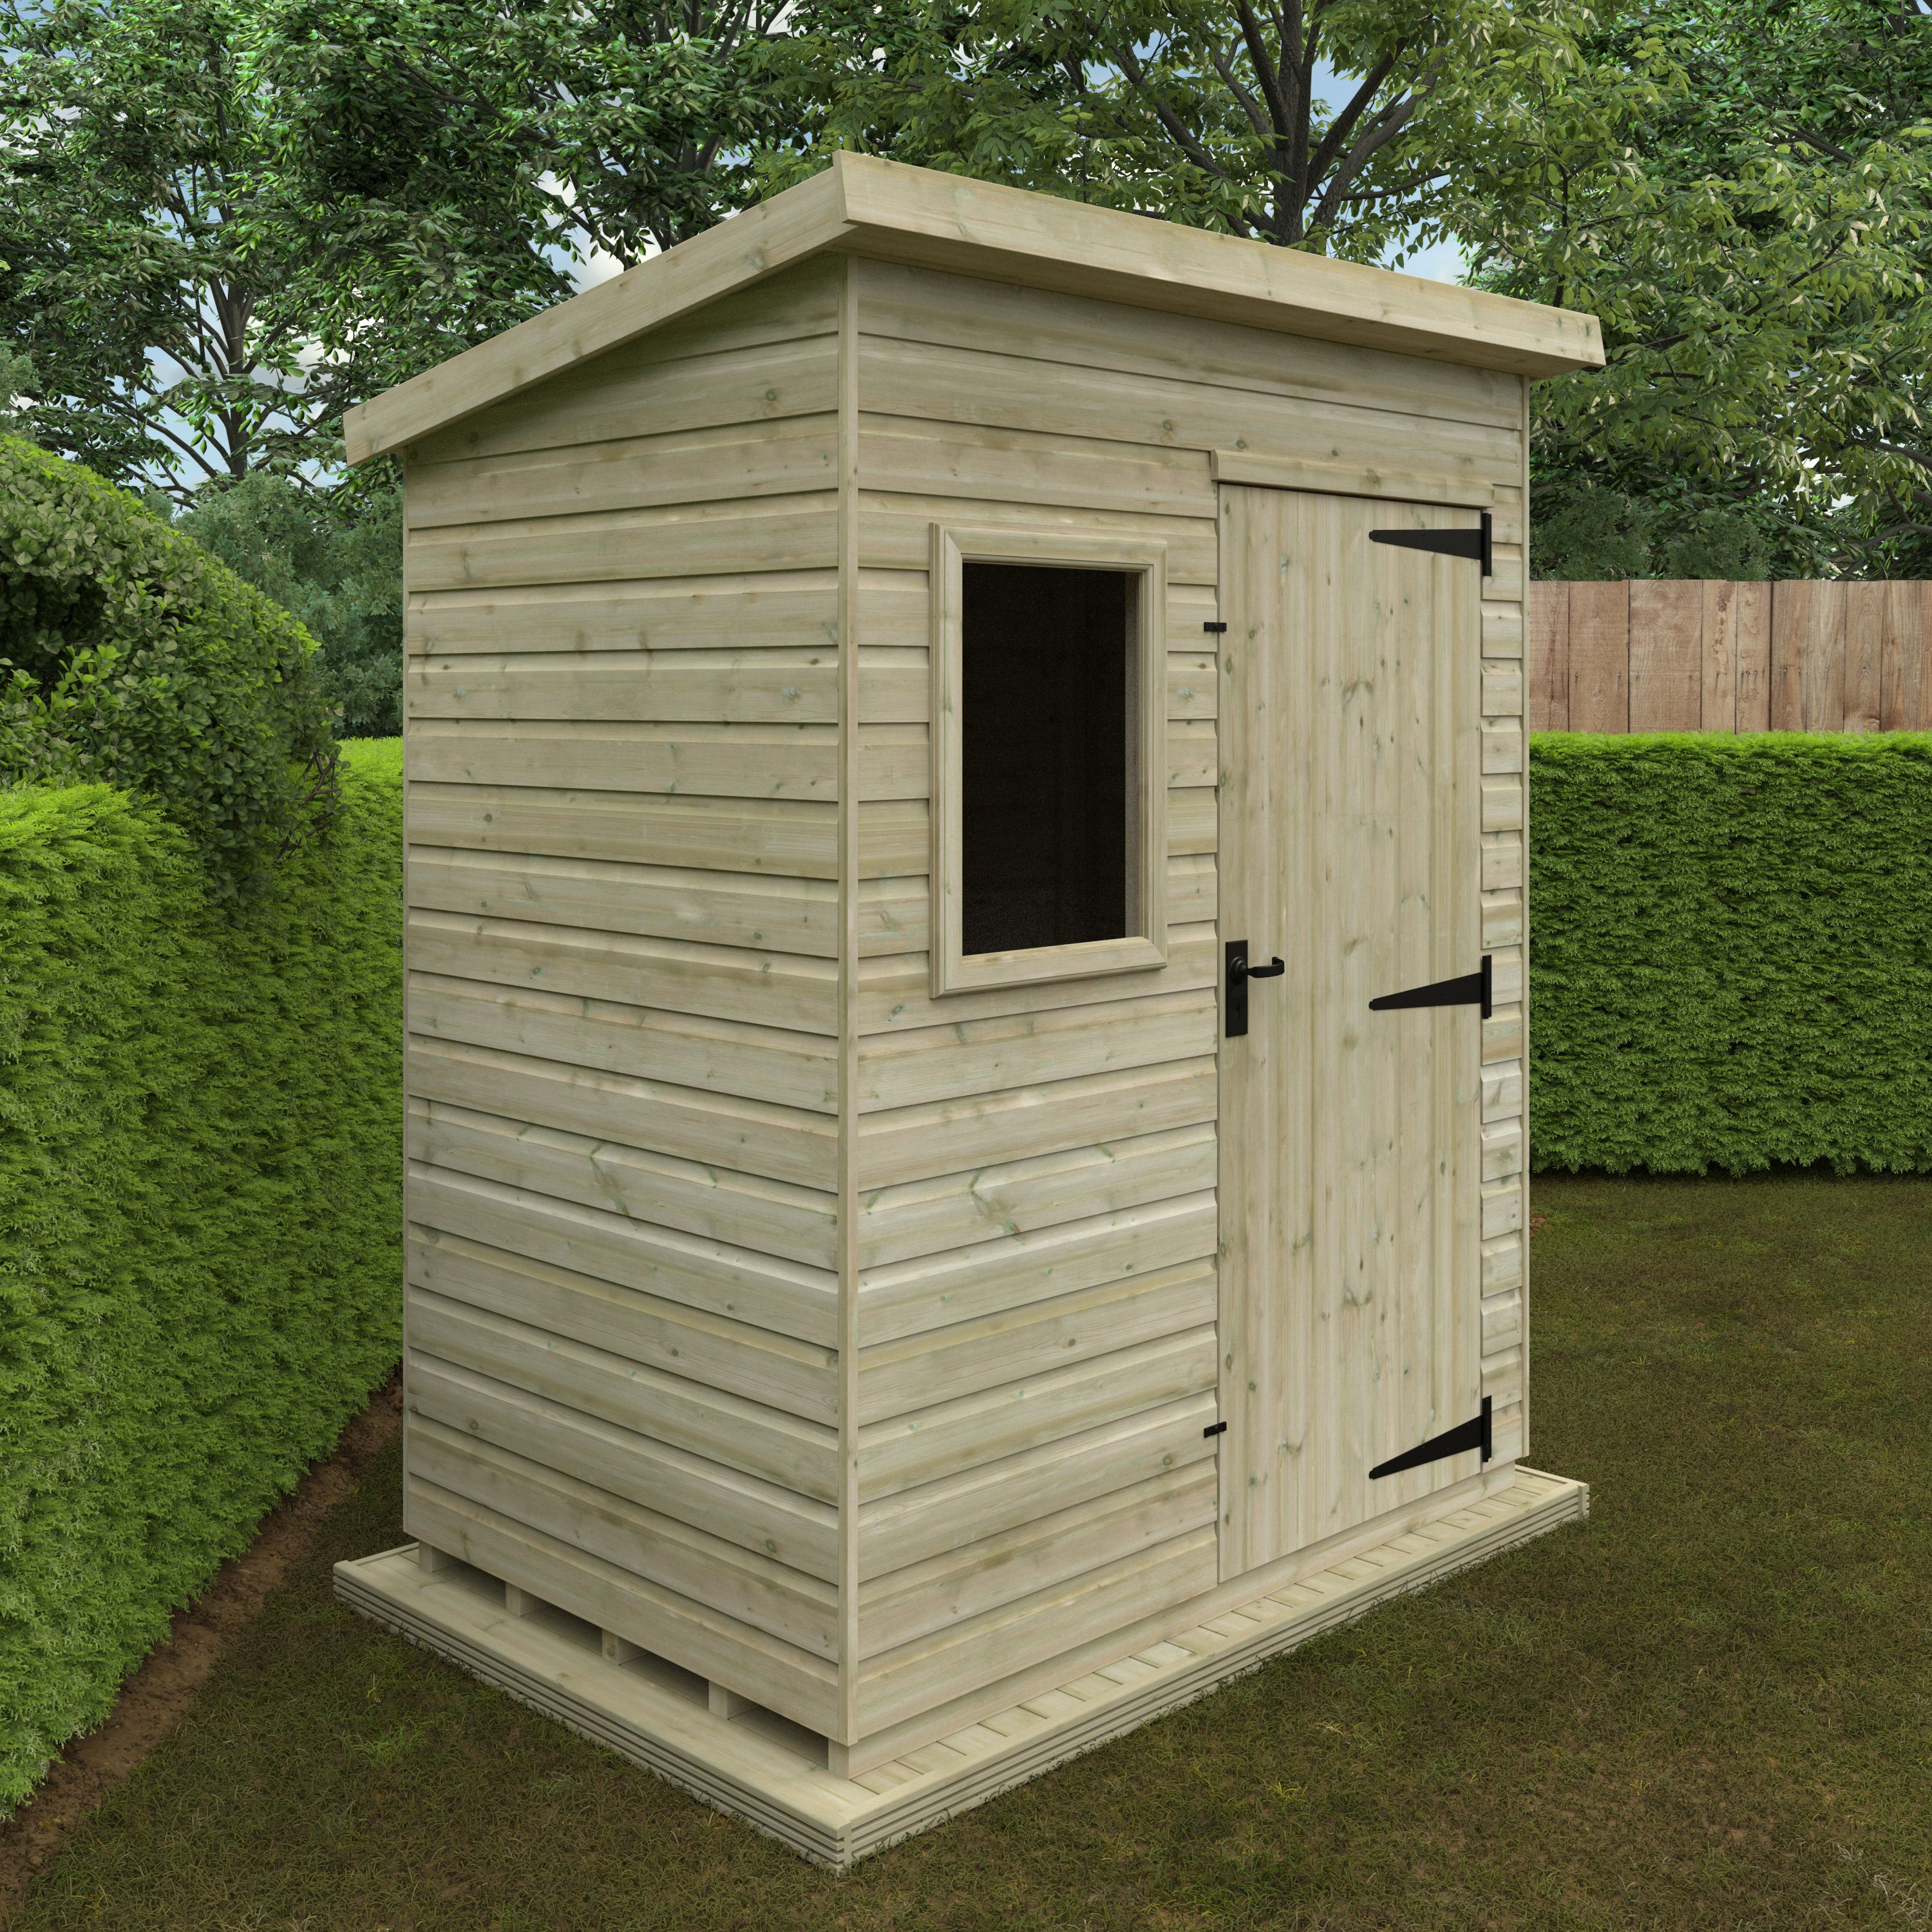 Redlands 5’ x 7’ Pressure Treated Deluxe Shiplap Pent Shed